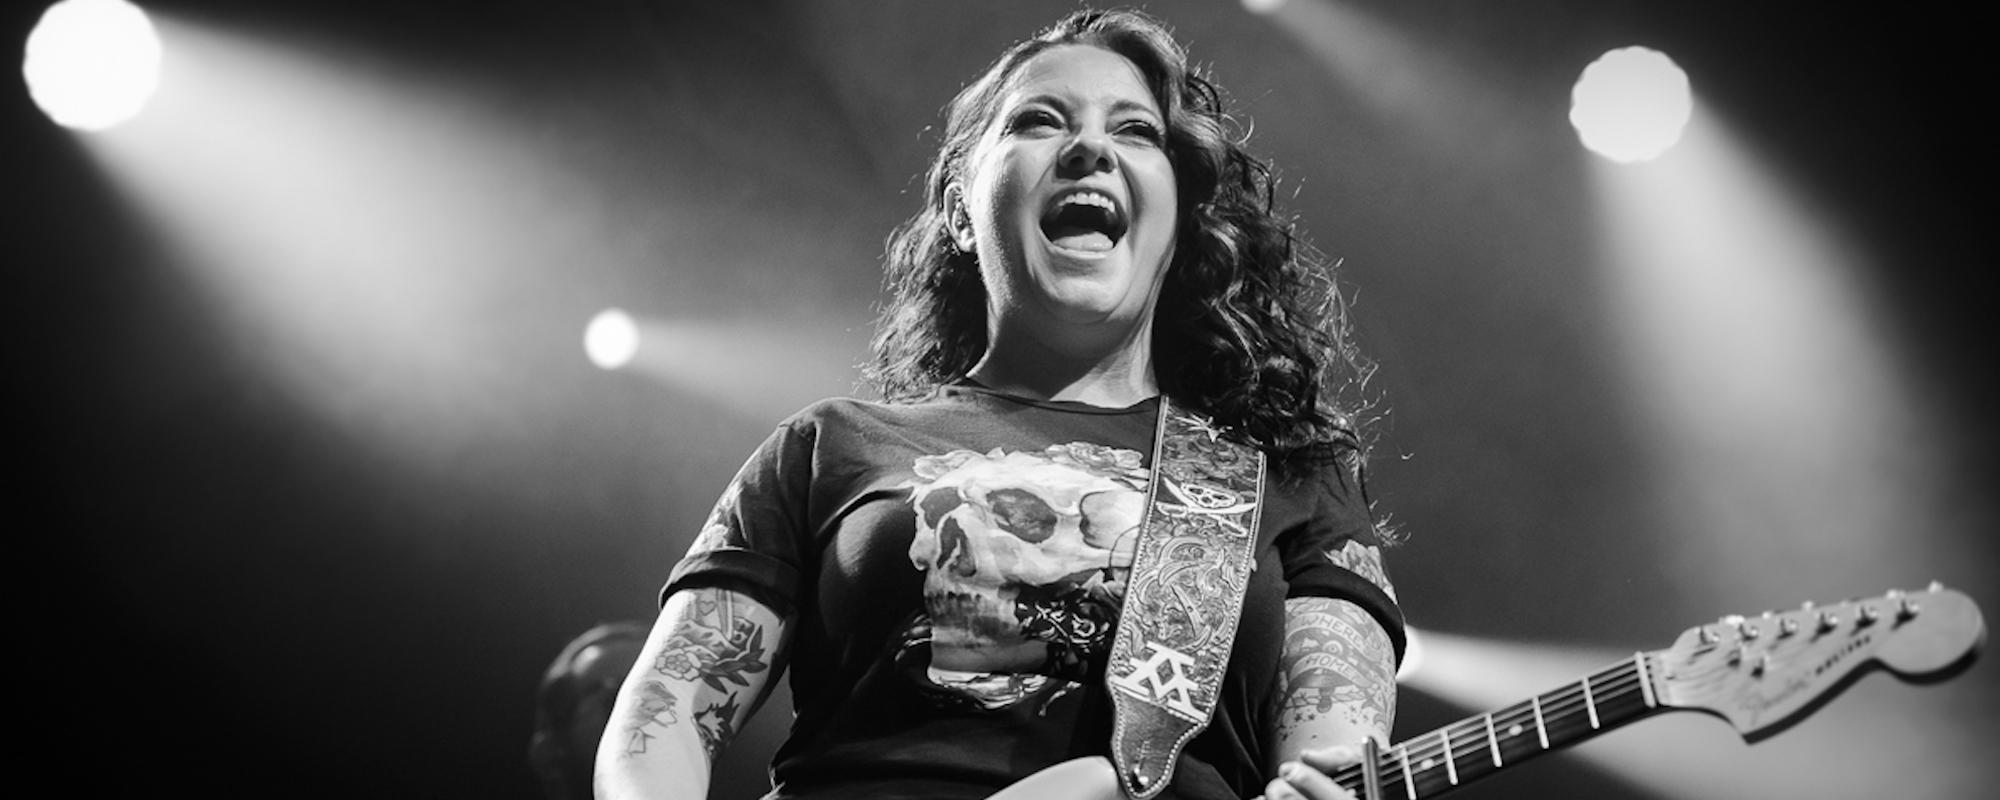 Behind the Song: “Bible and a .44” by Ashley McBryde